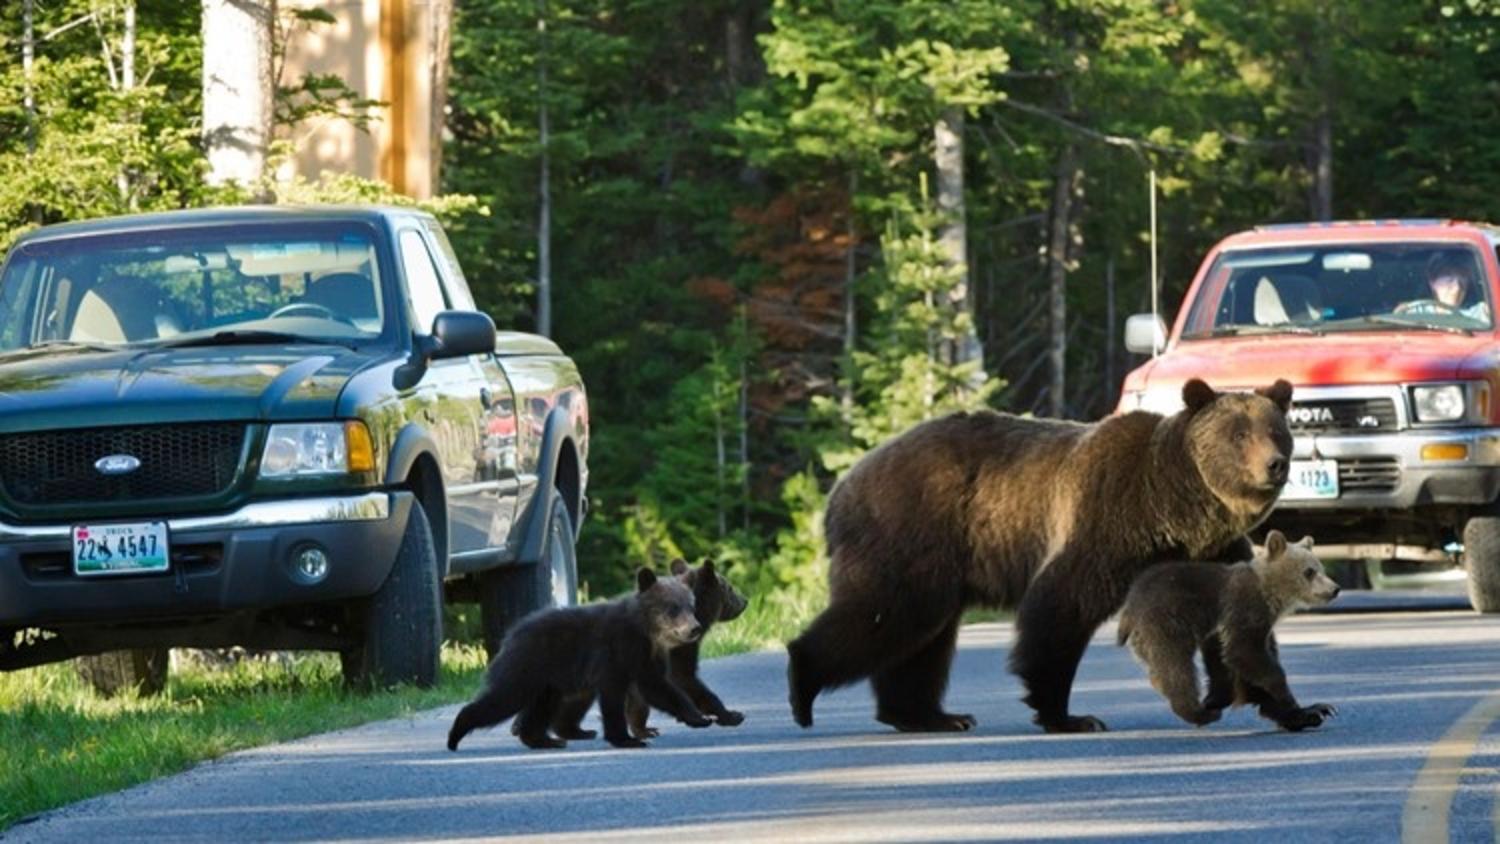 399's legend began shortly after this photograph was taken by Tom Mangelsen in 2007 showing her first set of triplets crossing a busy park highway in Grand Teton National Park. The picture appeared in newspapers around the world. Few knew then that the drama would continue for many years. Photo courtesy Thomas D. Mangelsen (mangelsen.com)